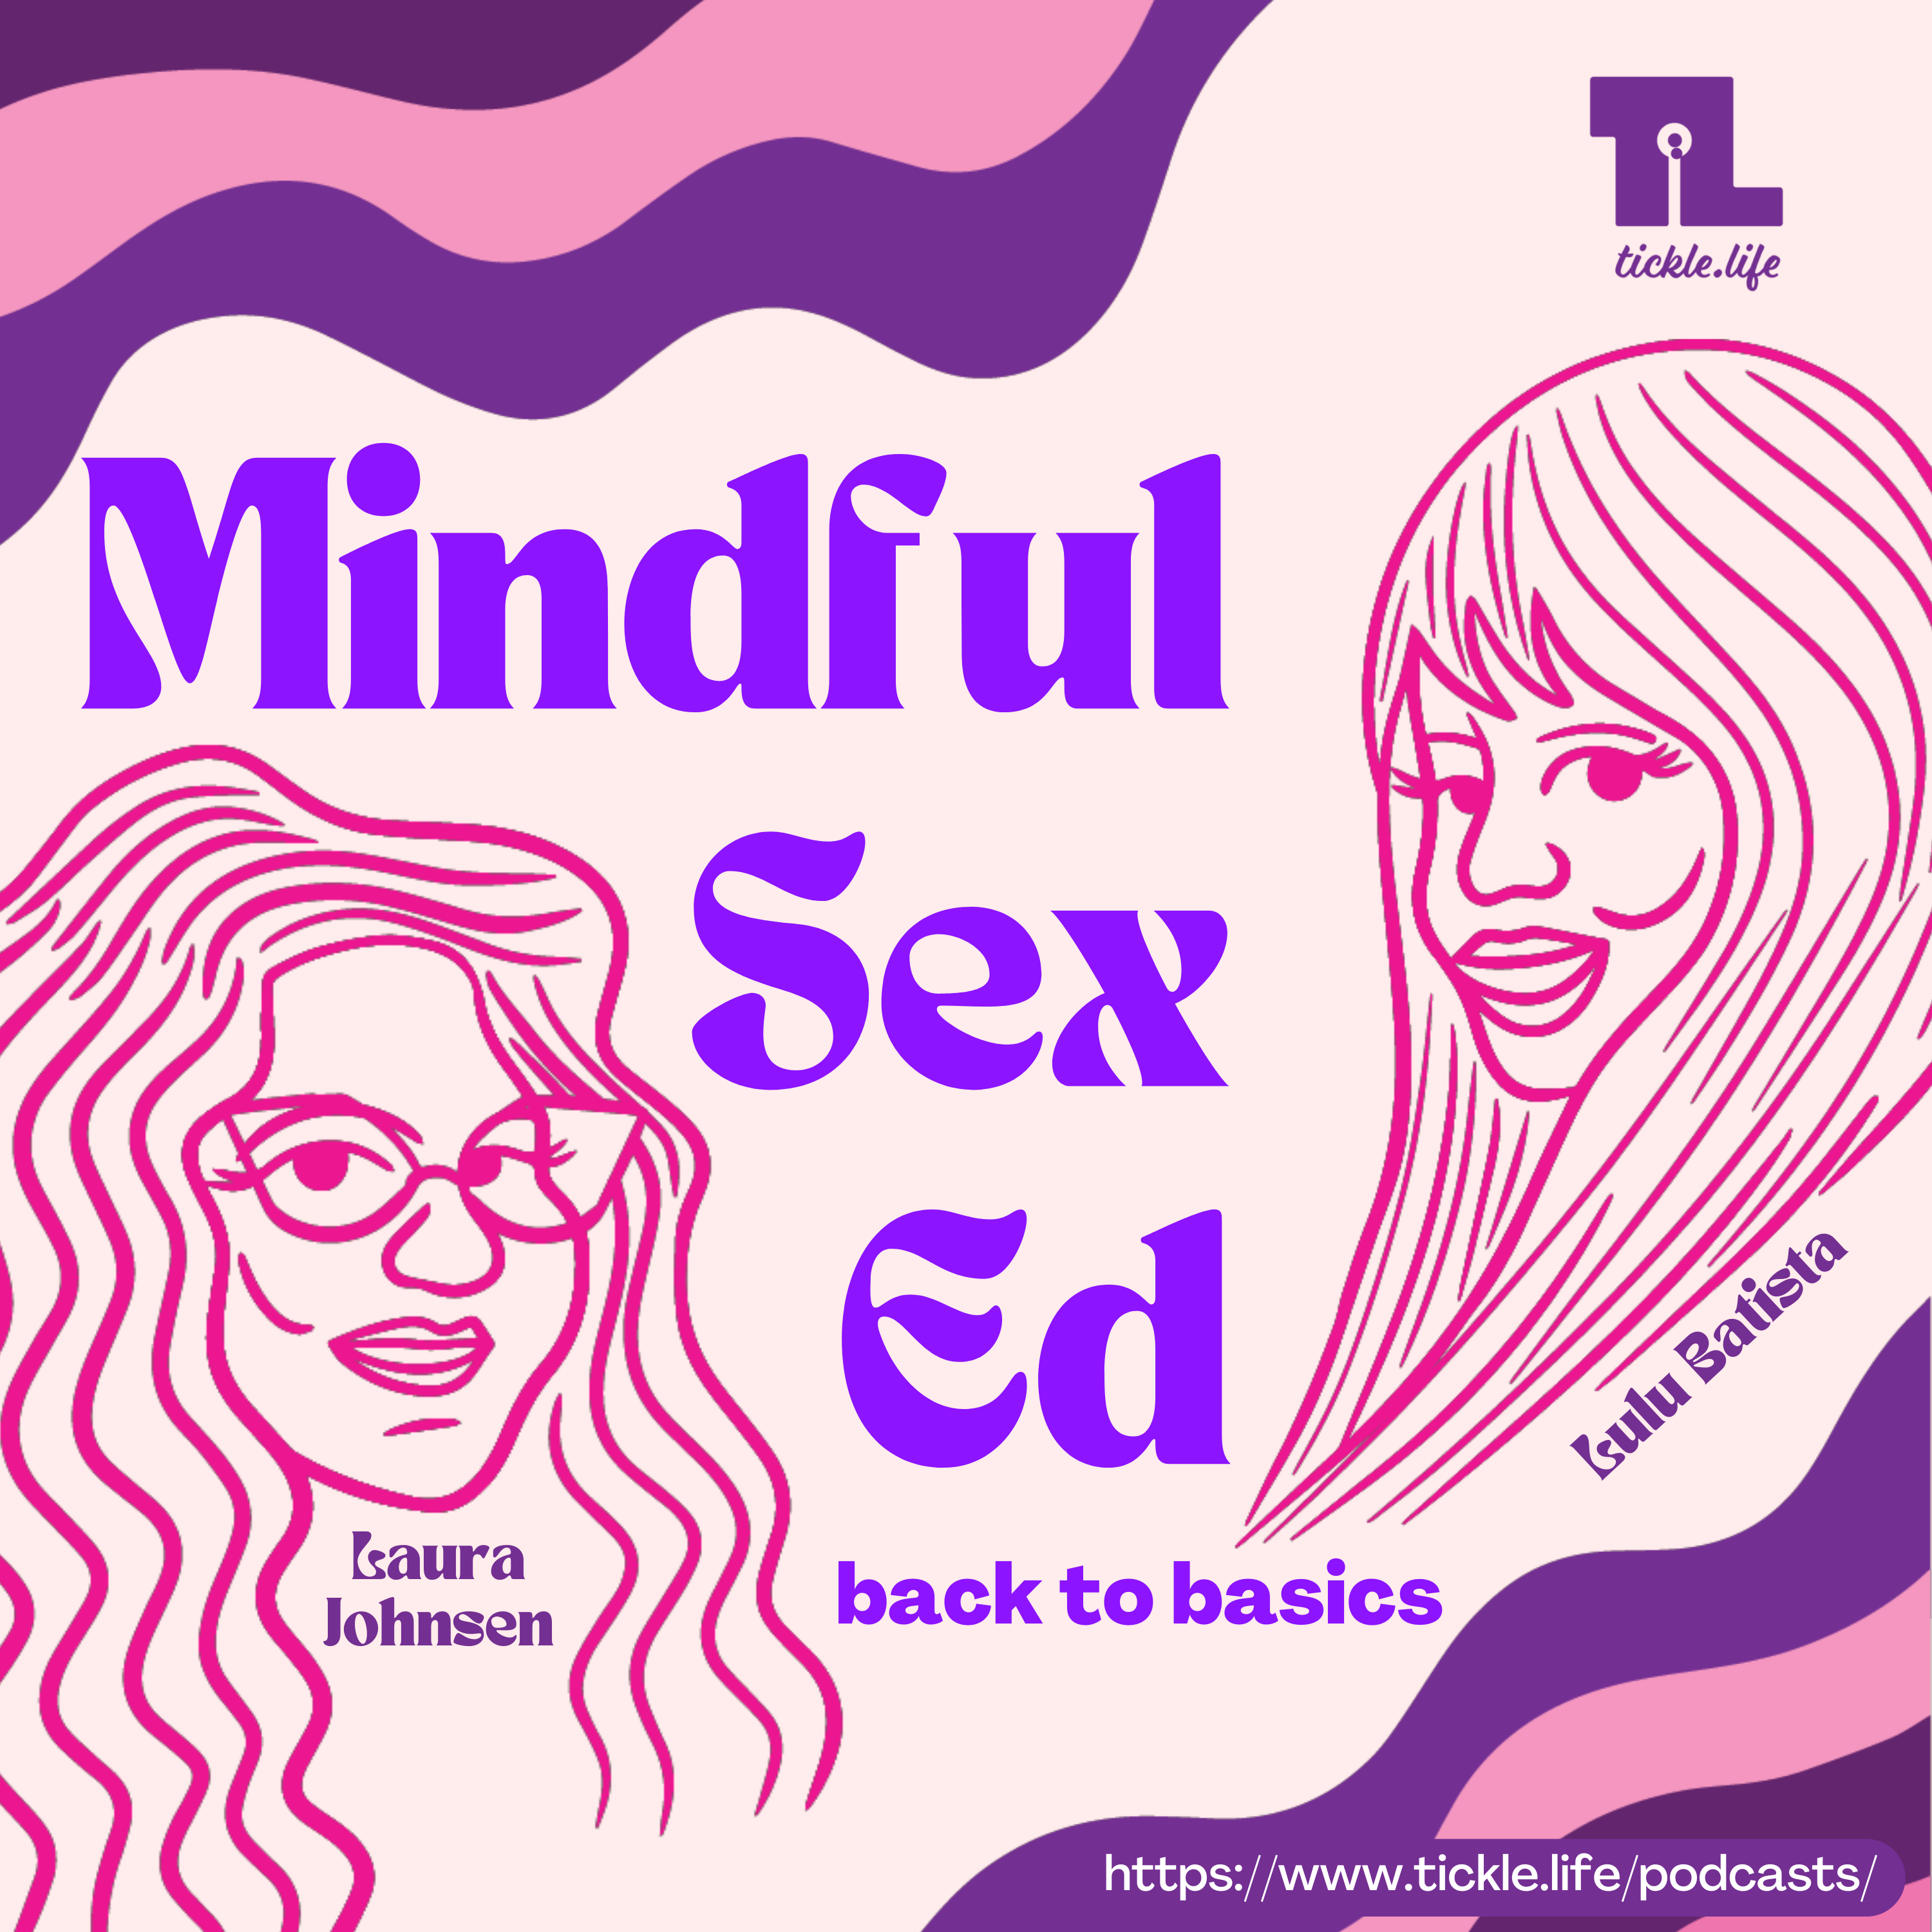 What Is 69 Nice – Mindful Sex Ed Back To Basics – Podcast – Podtail